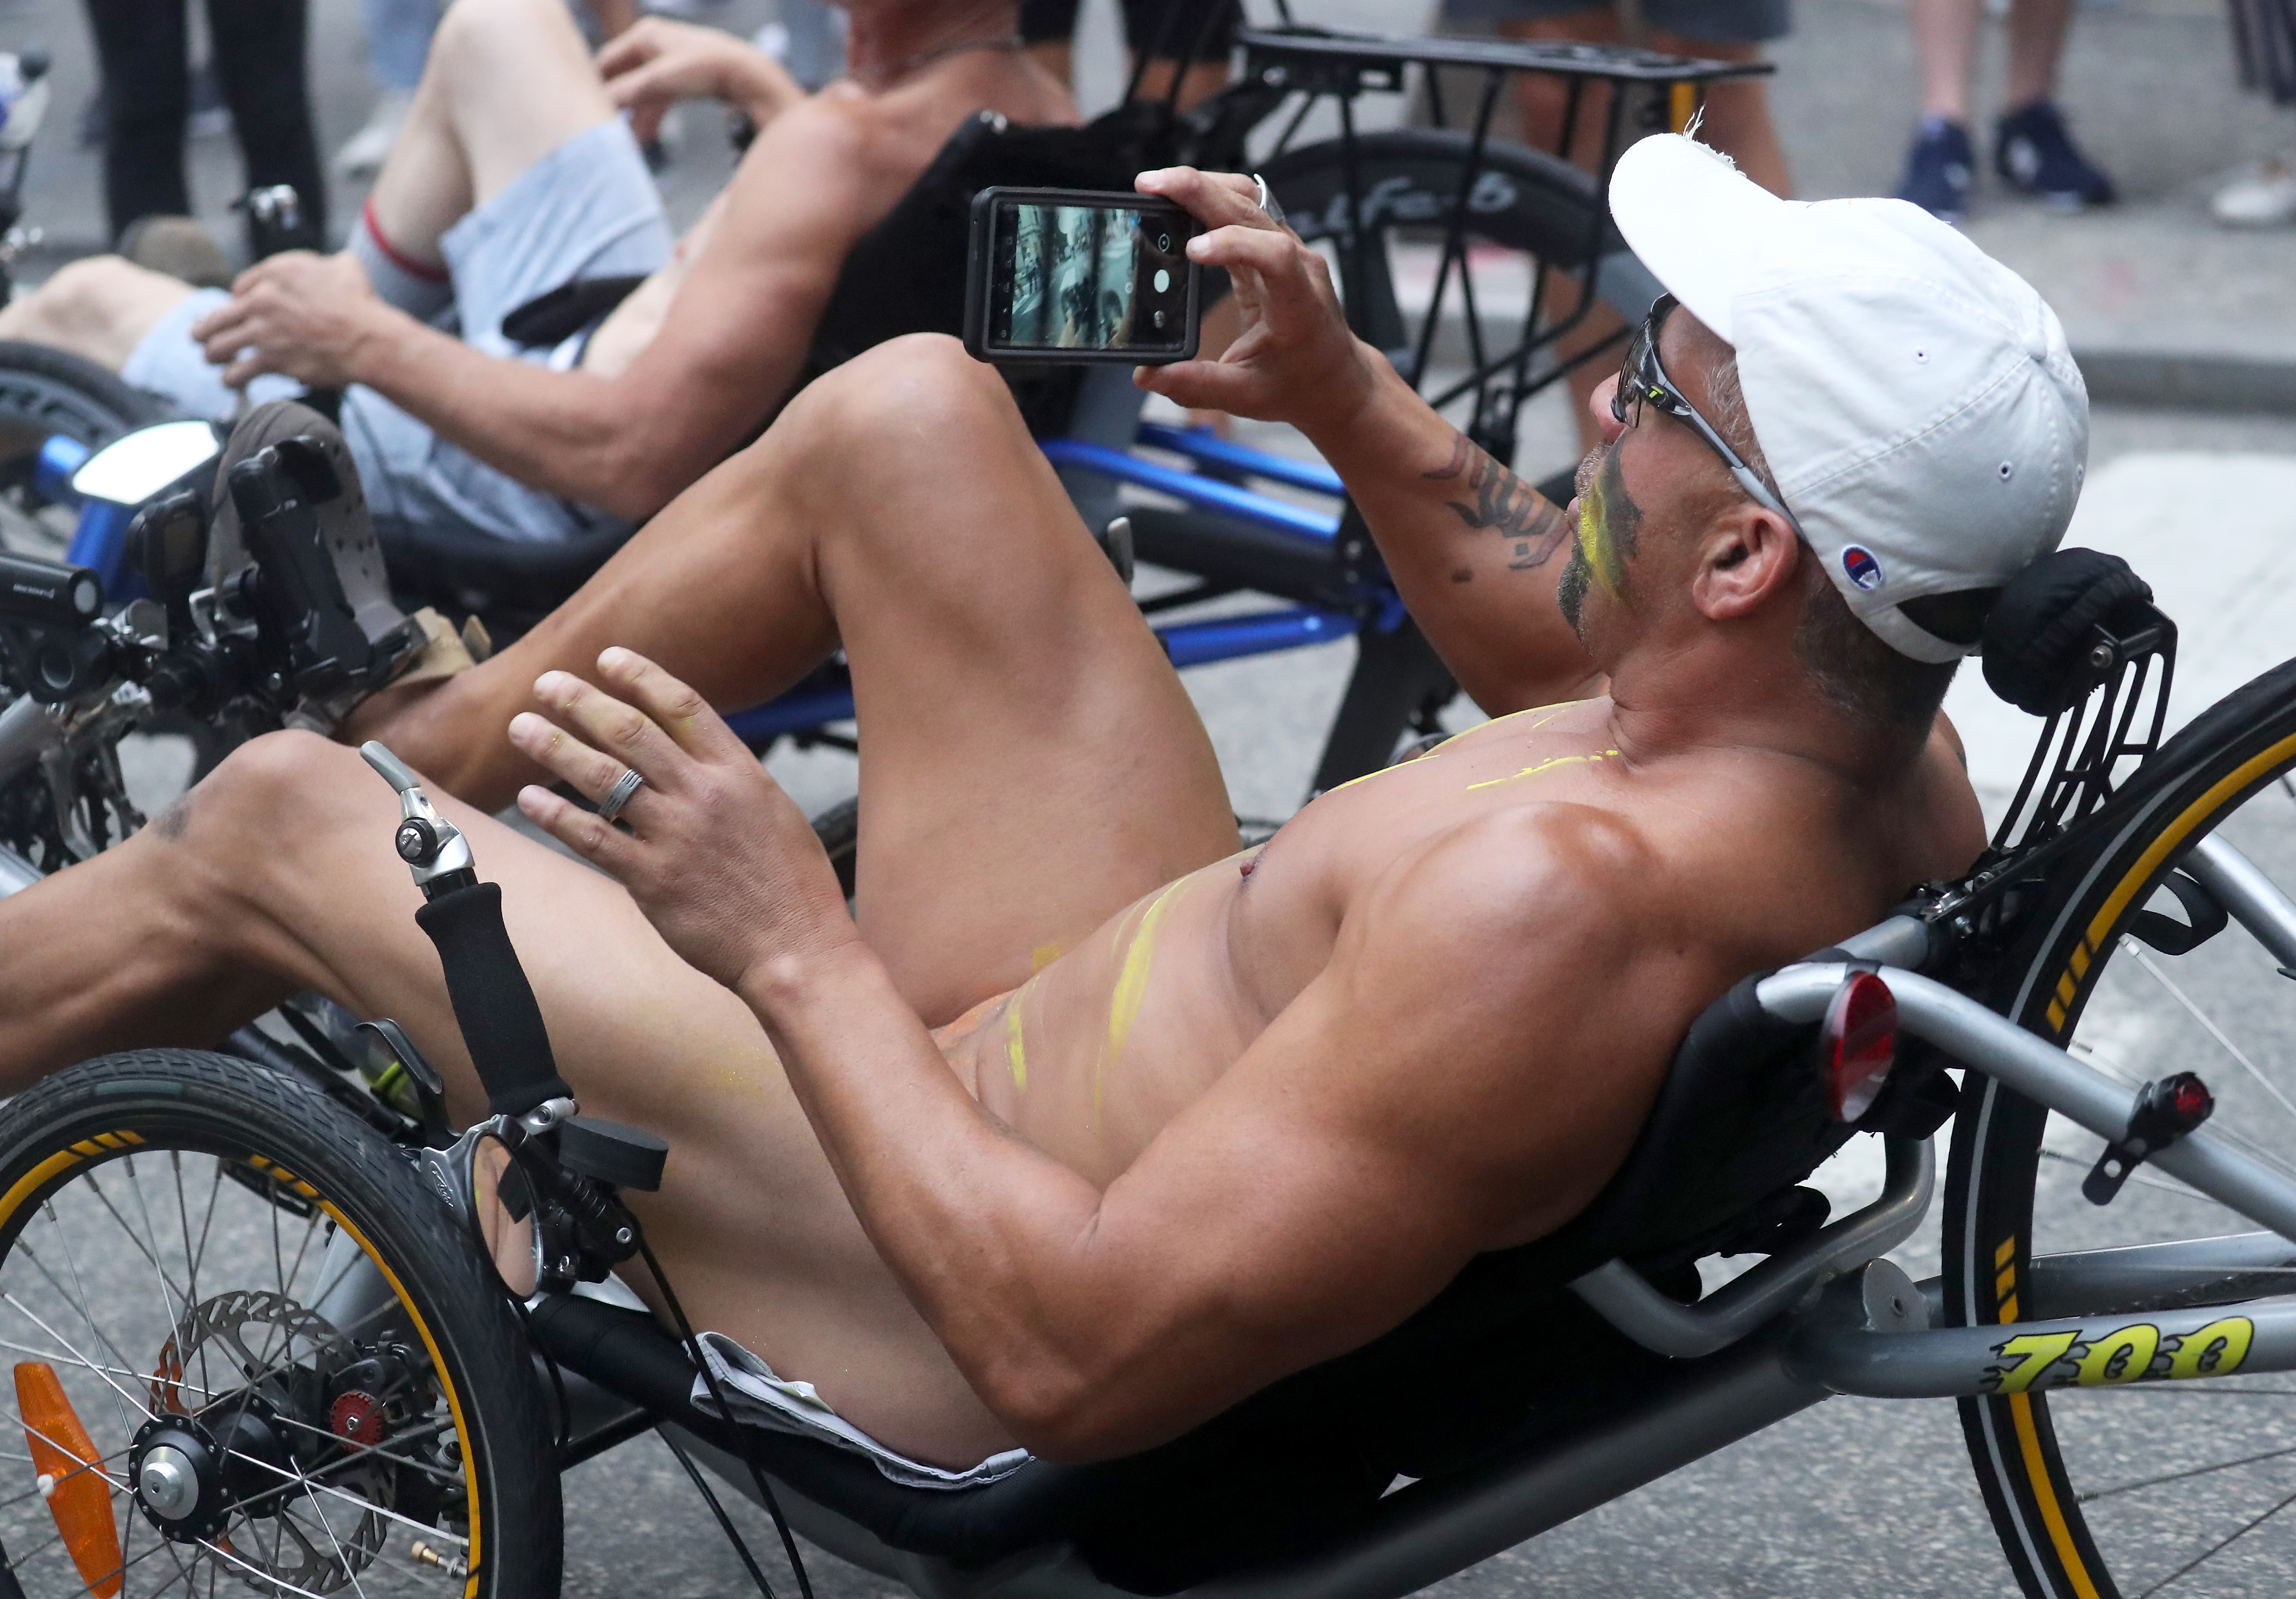 People ride bikes around Rittenhouse Square in Philadelphia during the Philly Naked Bike Ride, Saturday, Aug. 28, 2021.